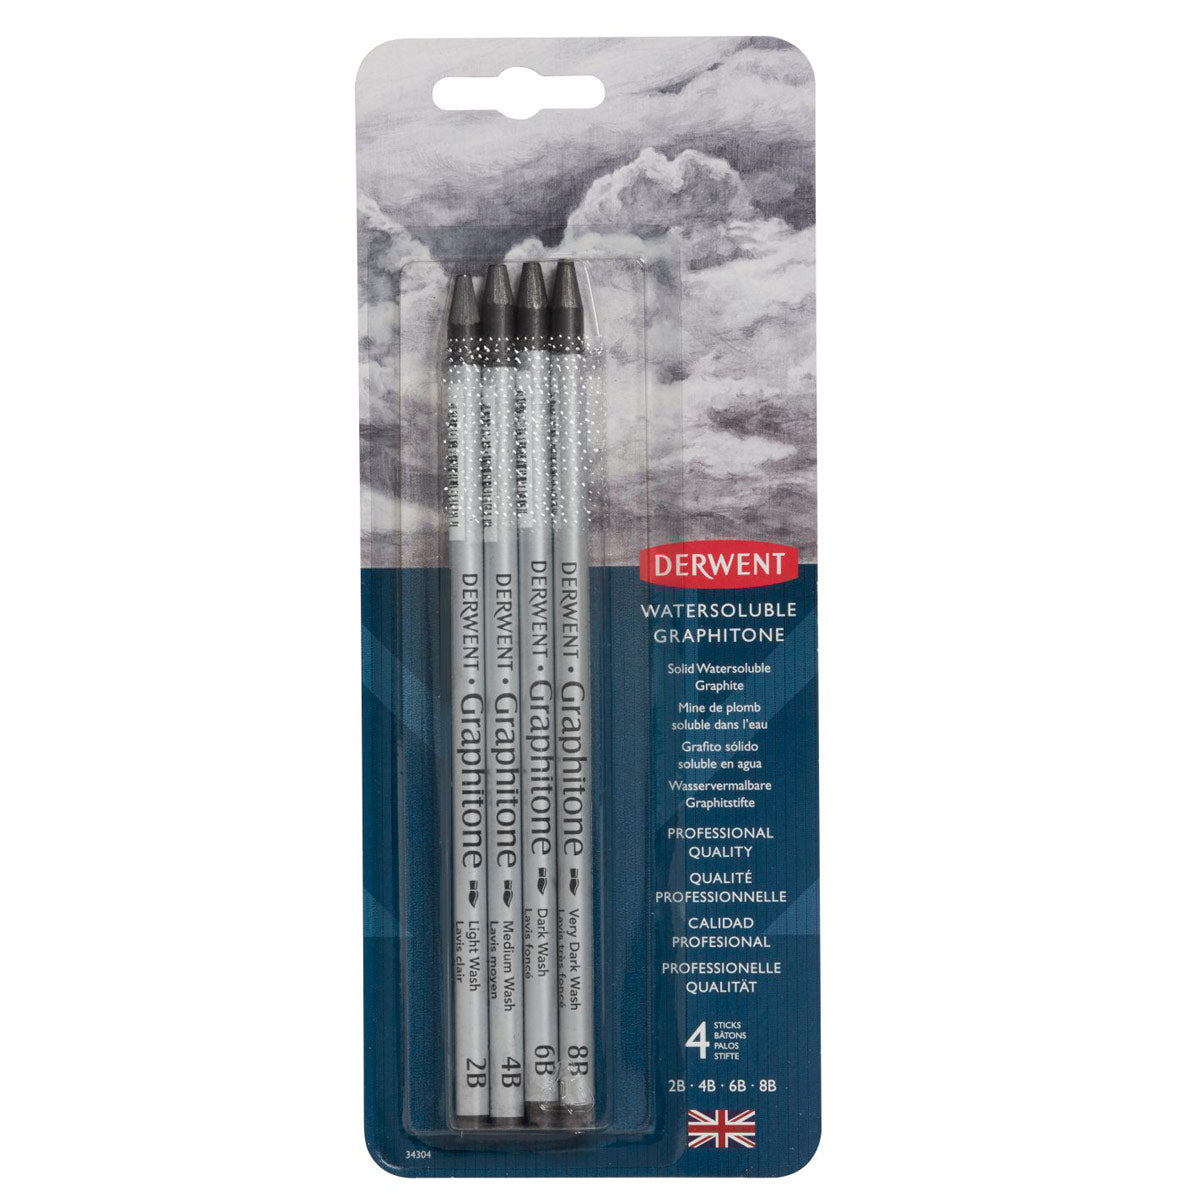 Derwent - Blister 4 Pack - Watersoluble Graphitone Stick